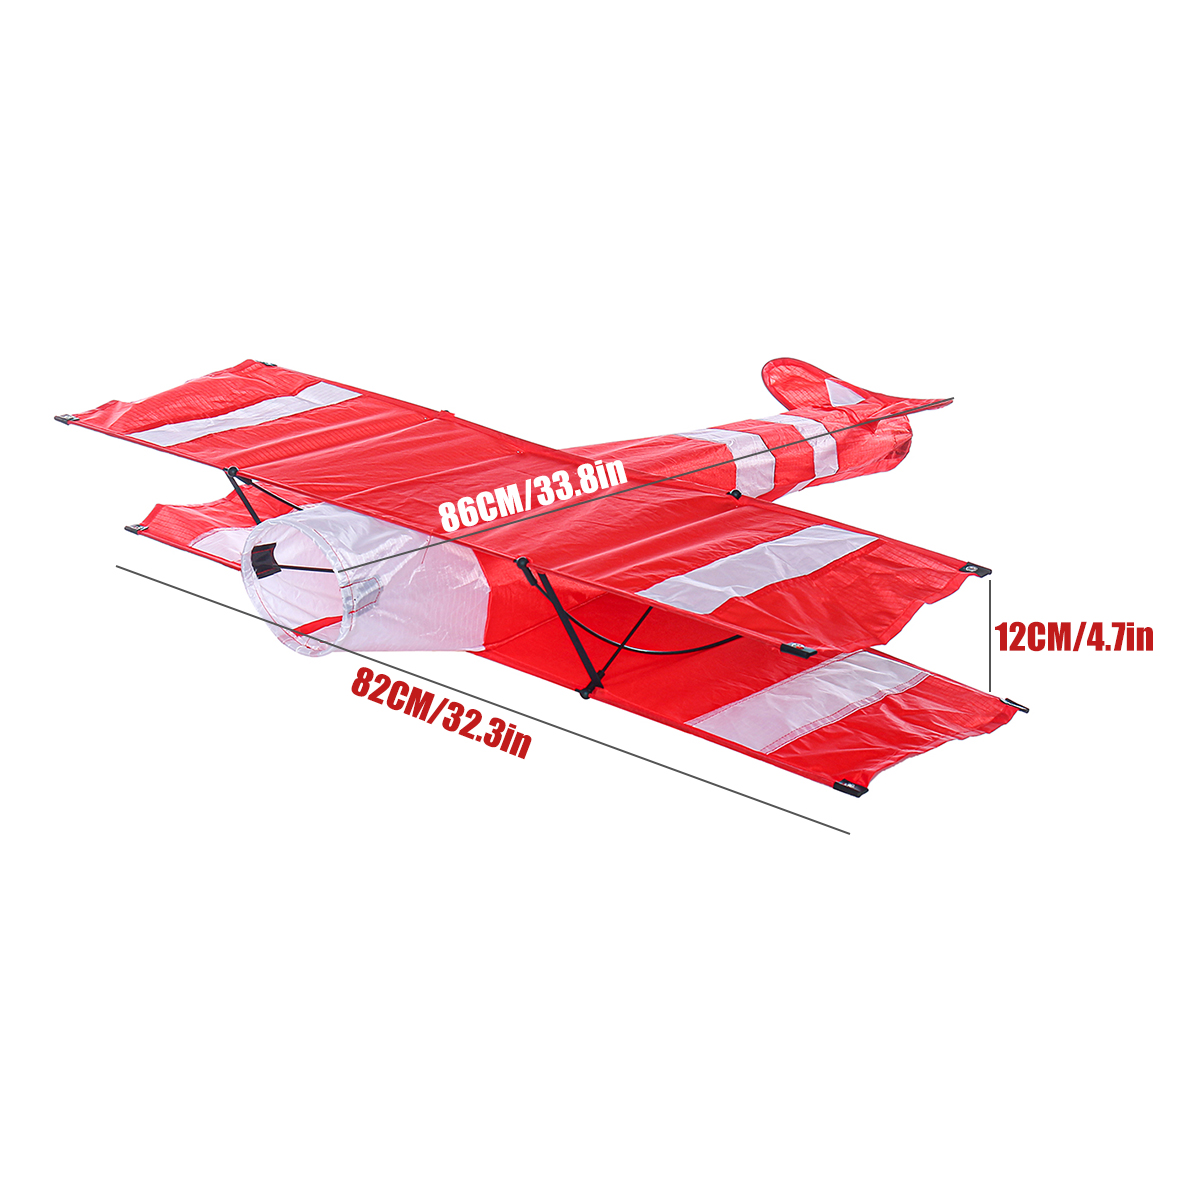 Colorful-3D-Aircraft-Kite-With-Handle-and-Line-Good-Flying-Gift-1610431-5